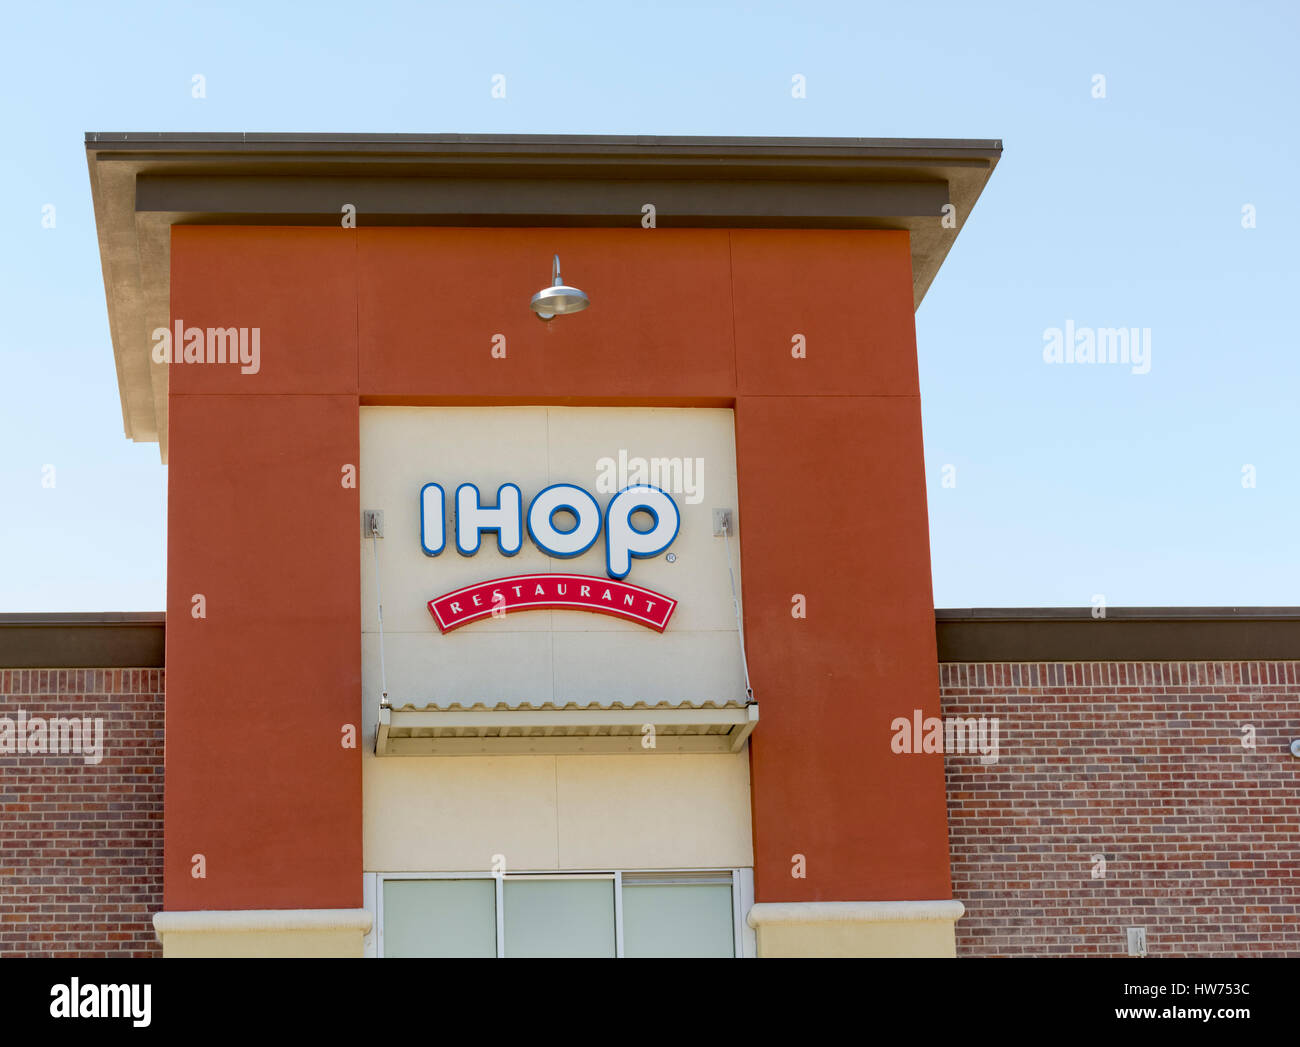 IHOP sign editorial stock photo. Image of commerce, business